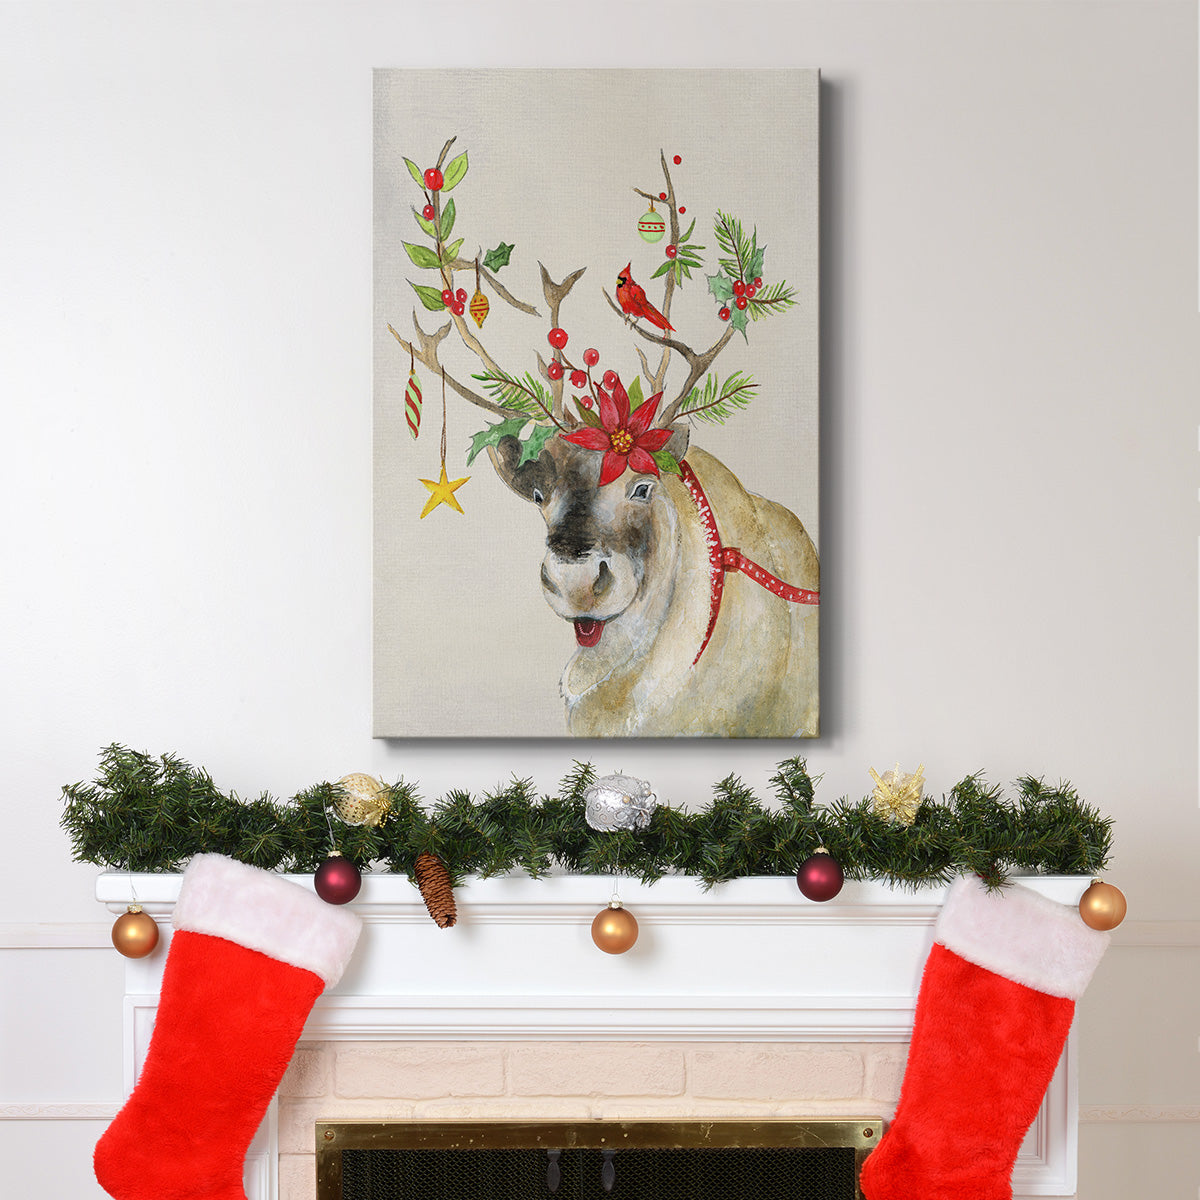 Playful Reindeer II - Gallery Wrapped Canvas